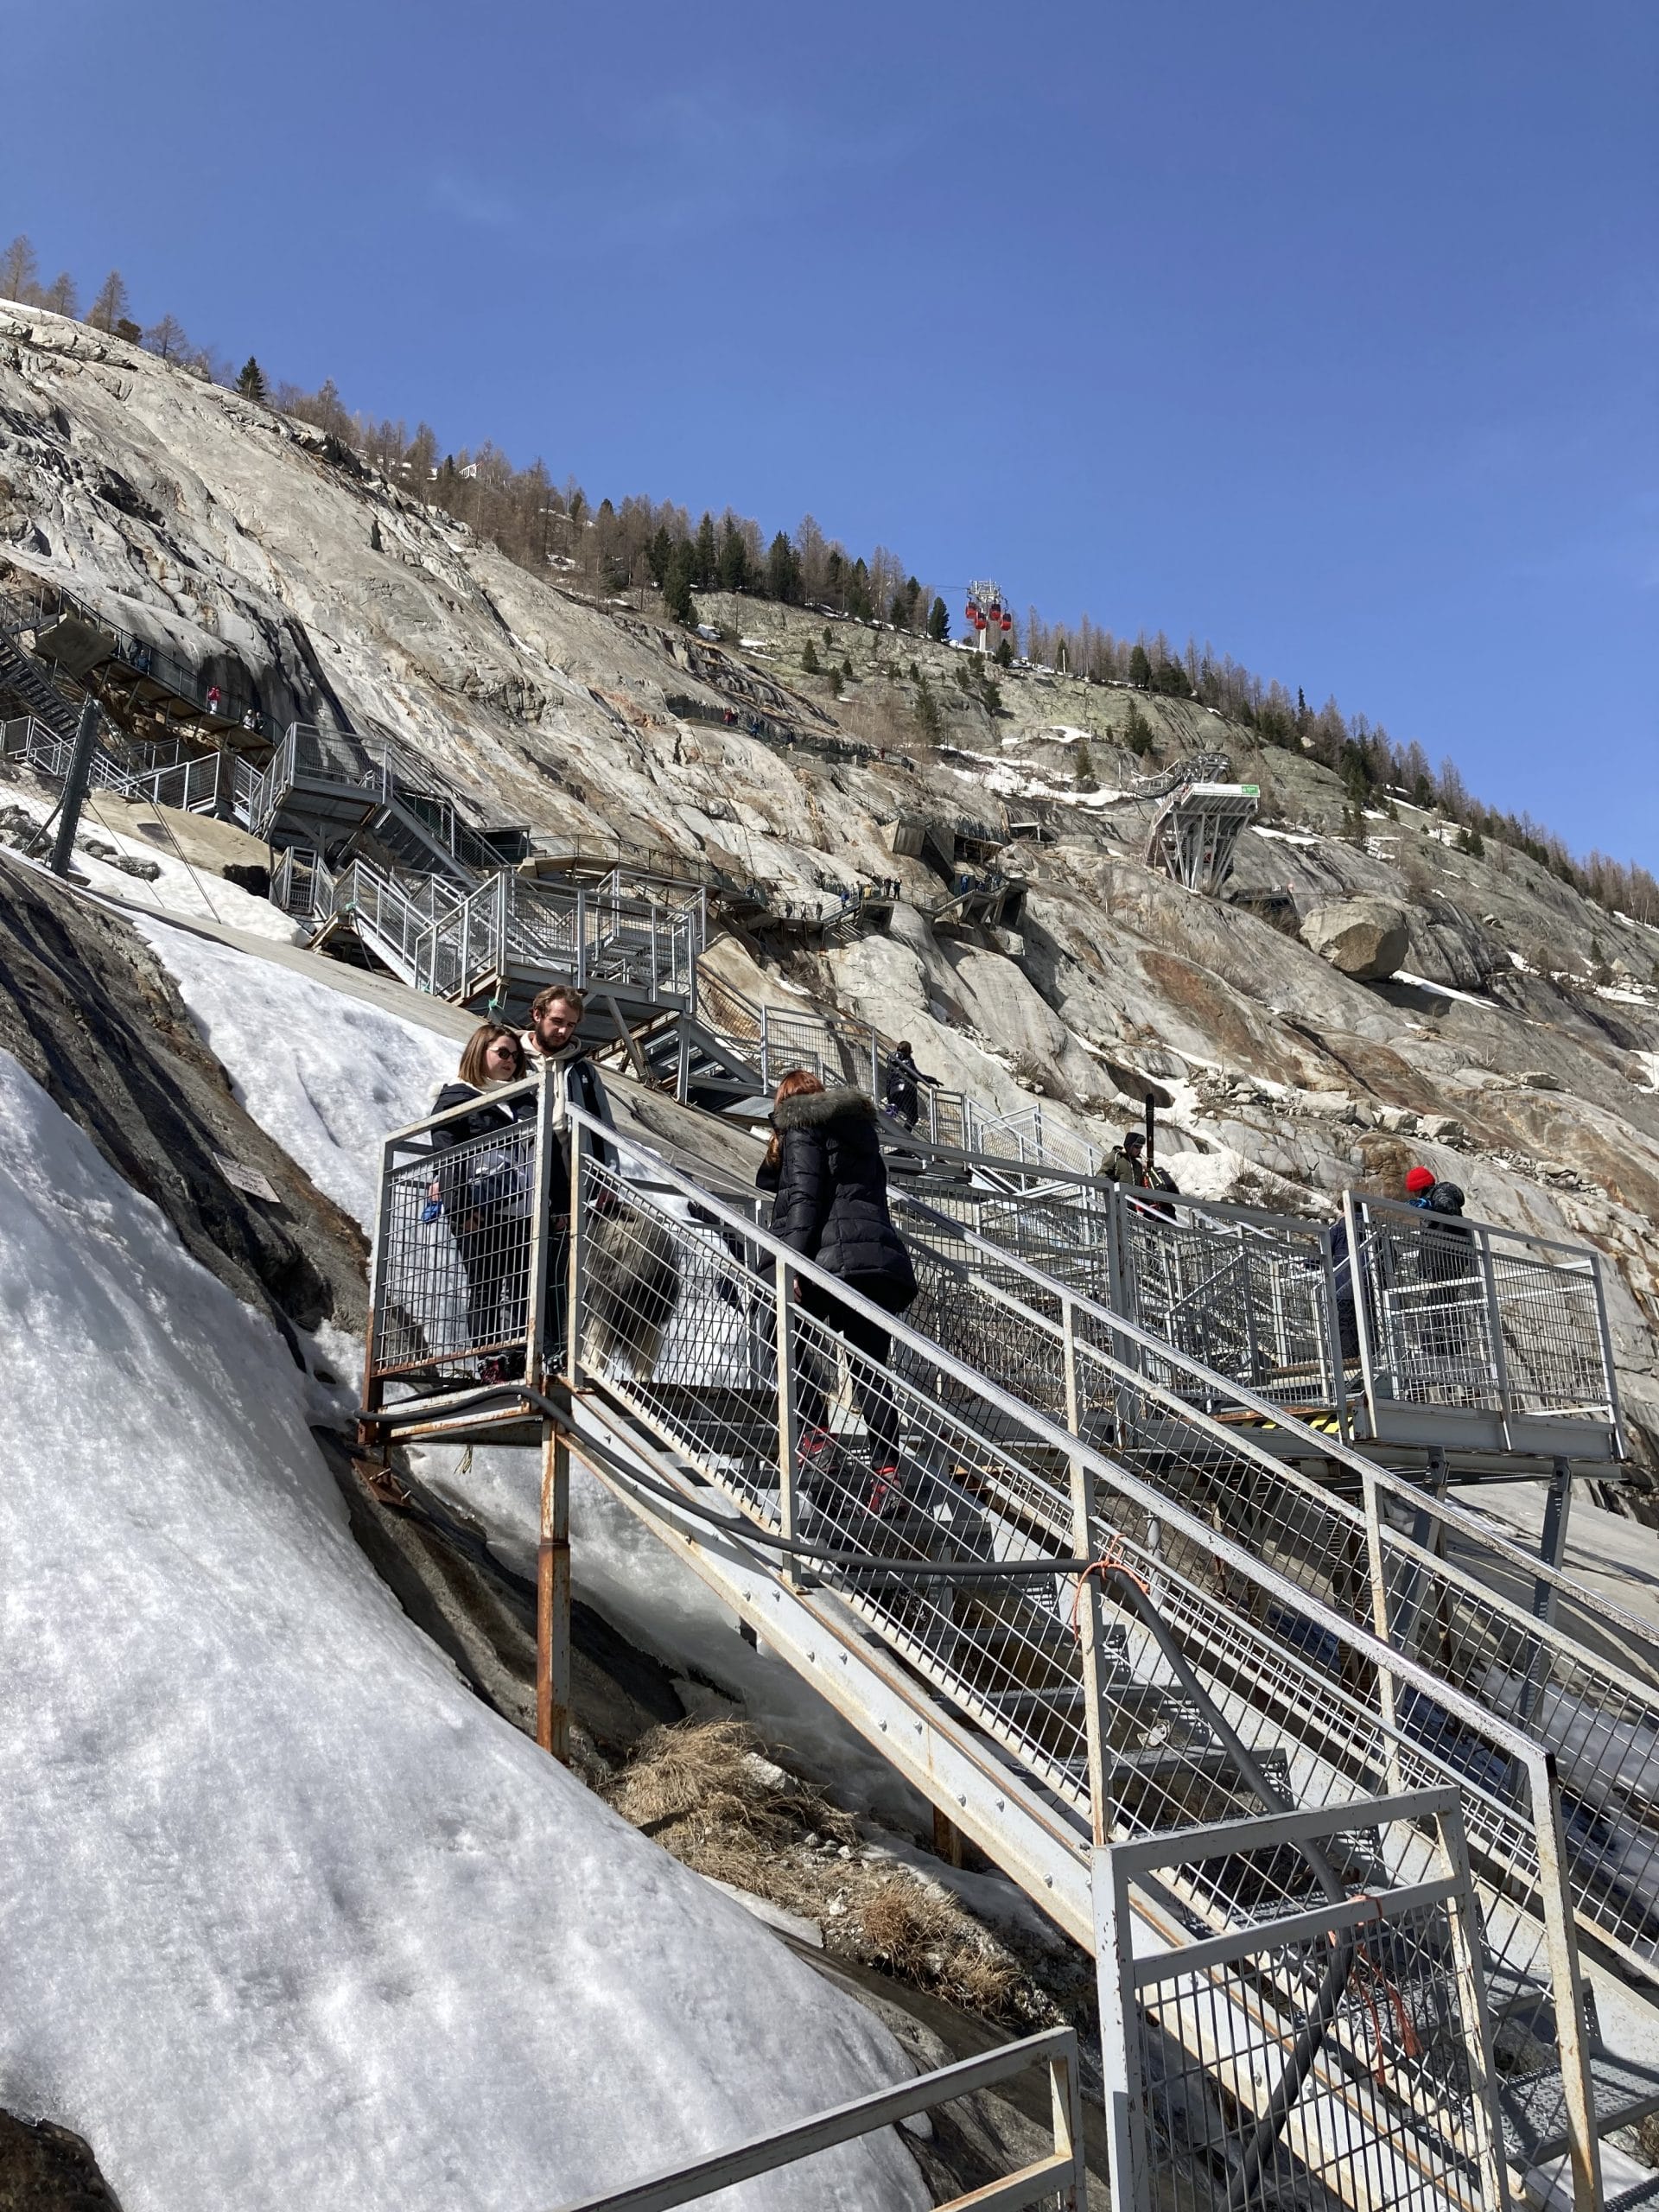 In 2022 there were 580 stairs down from the cable car to the glacier.